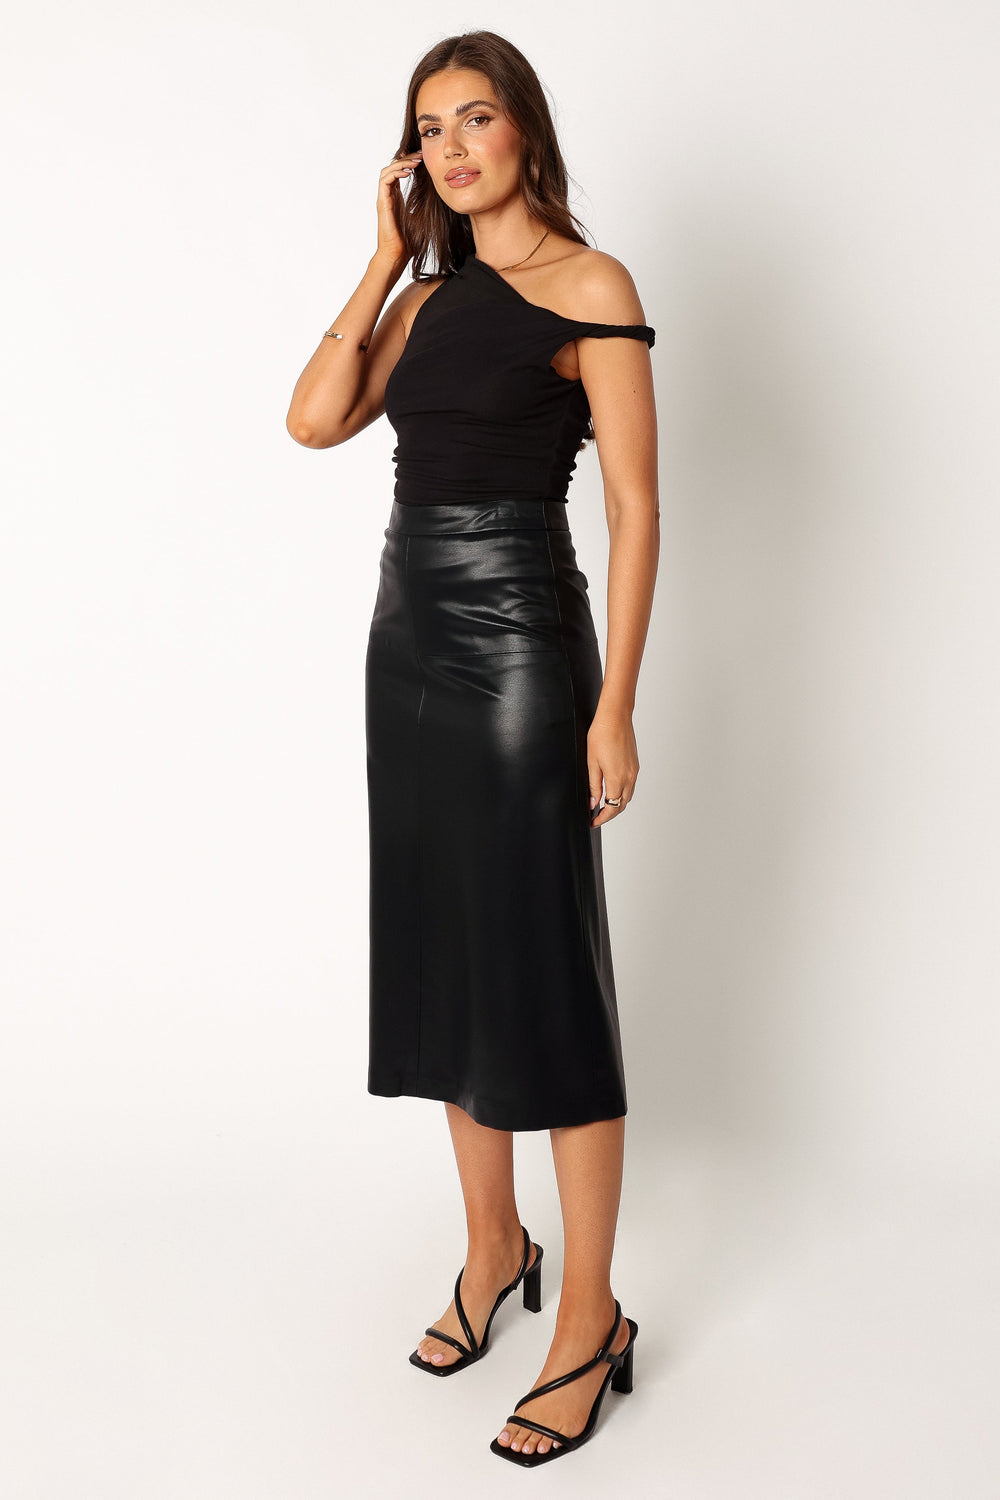 Petal and Pup USA BOTTOMS Miller Faux Leather Midi Skirt - Black